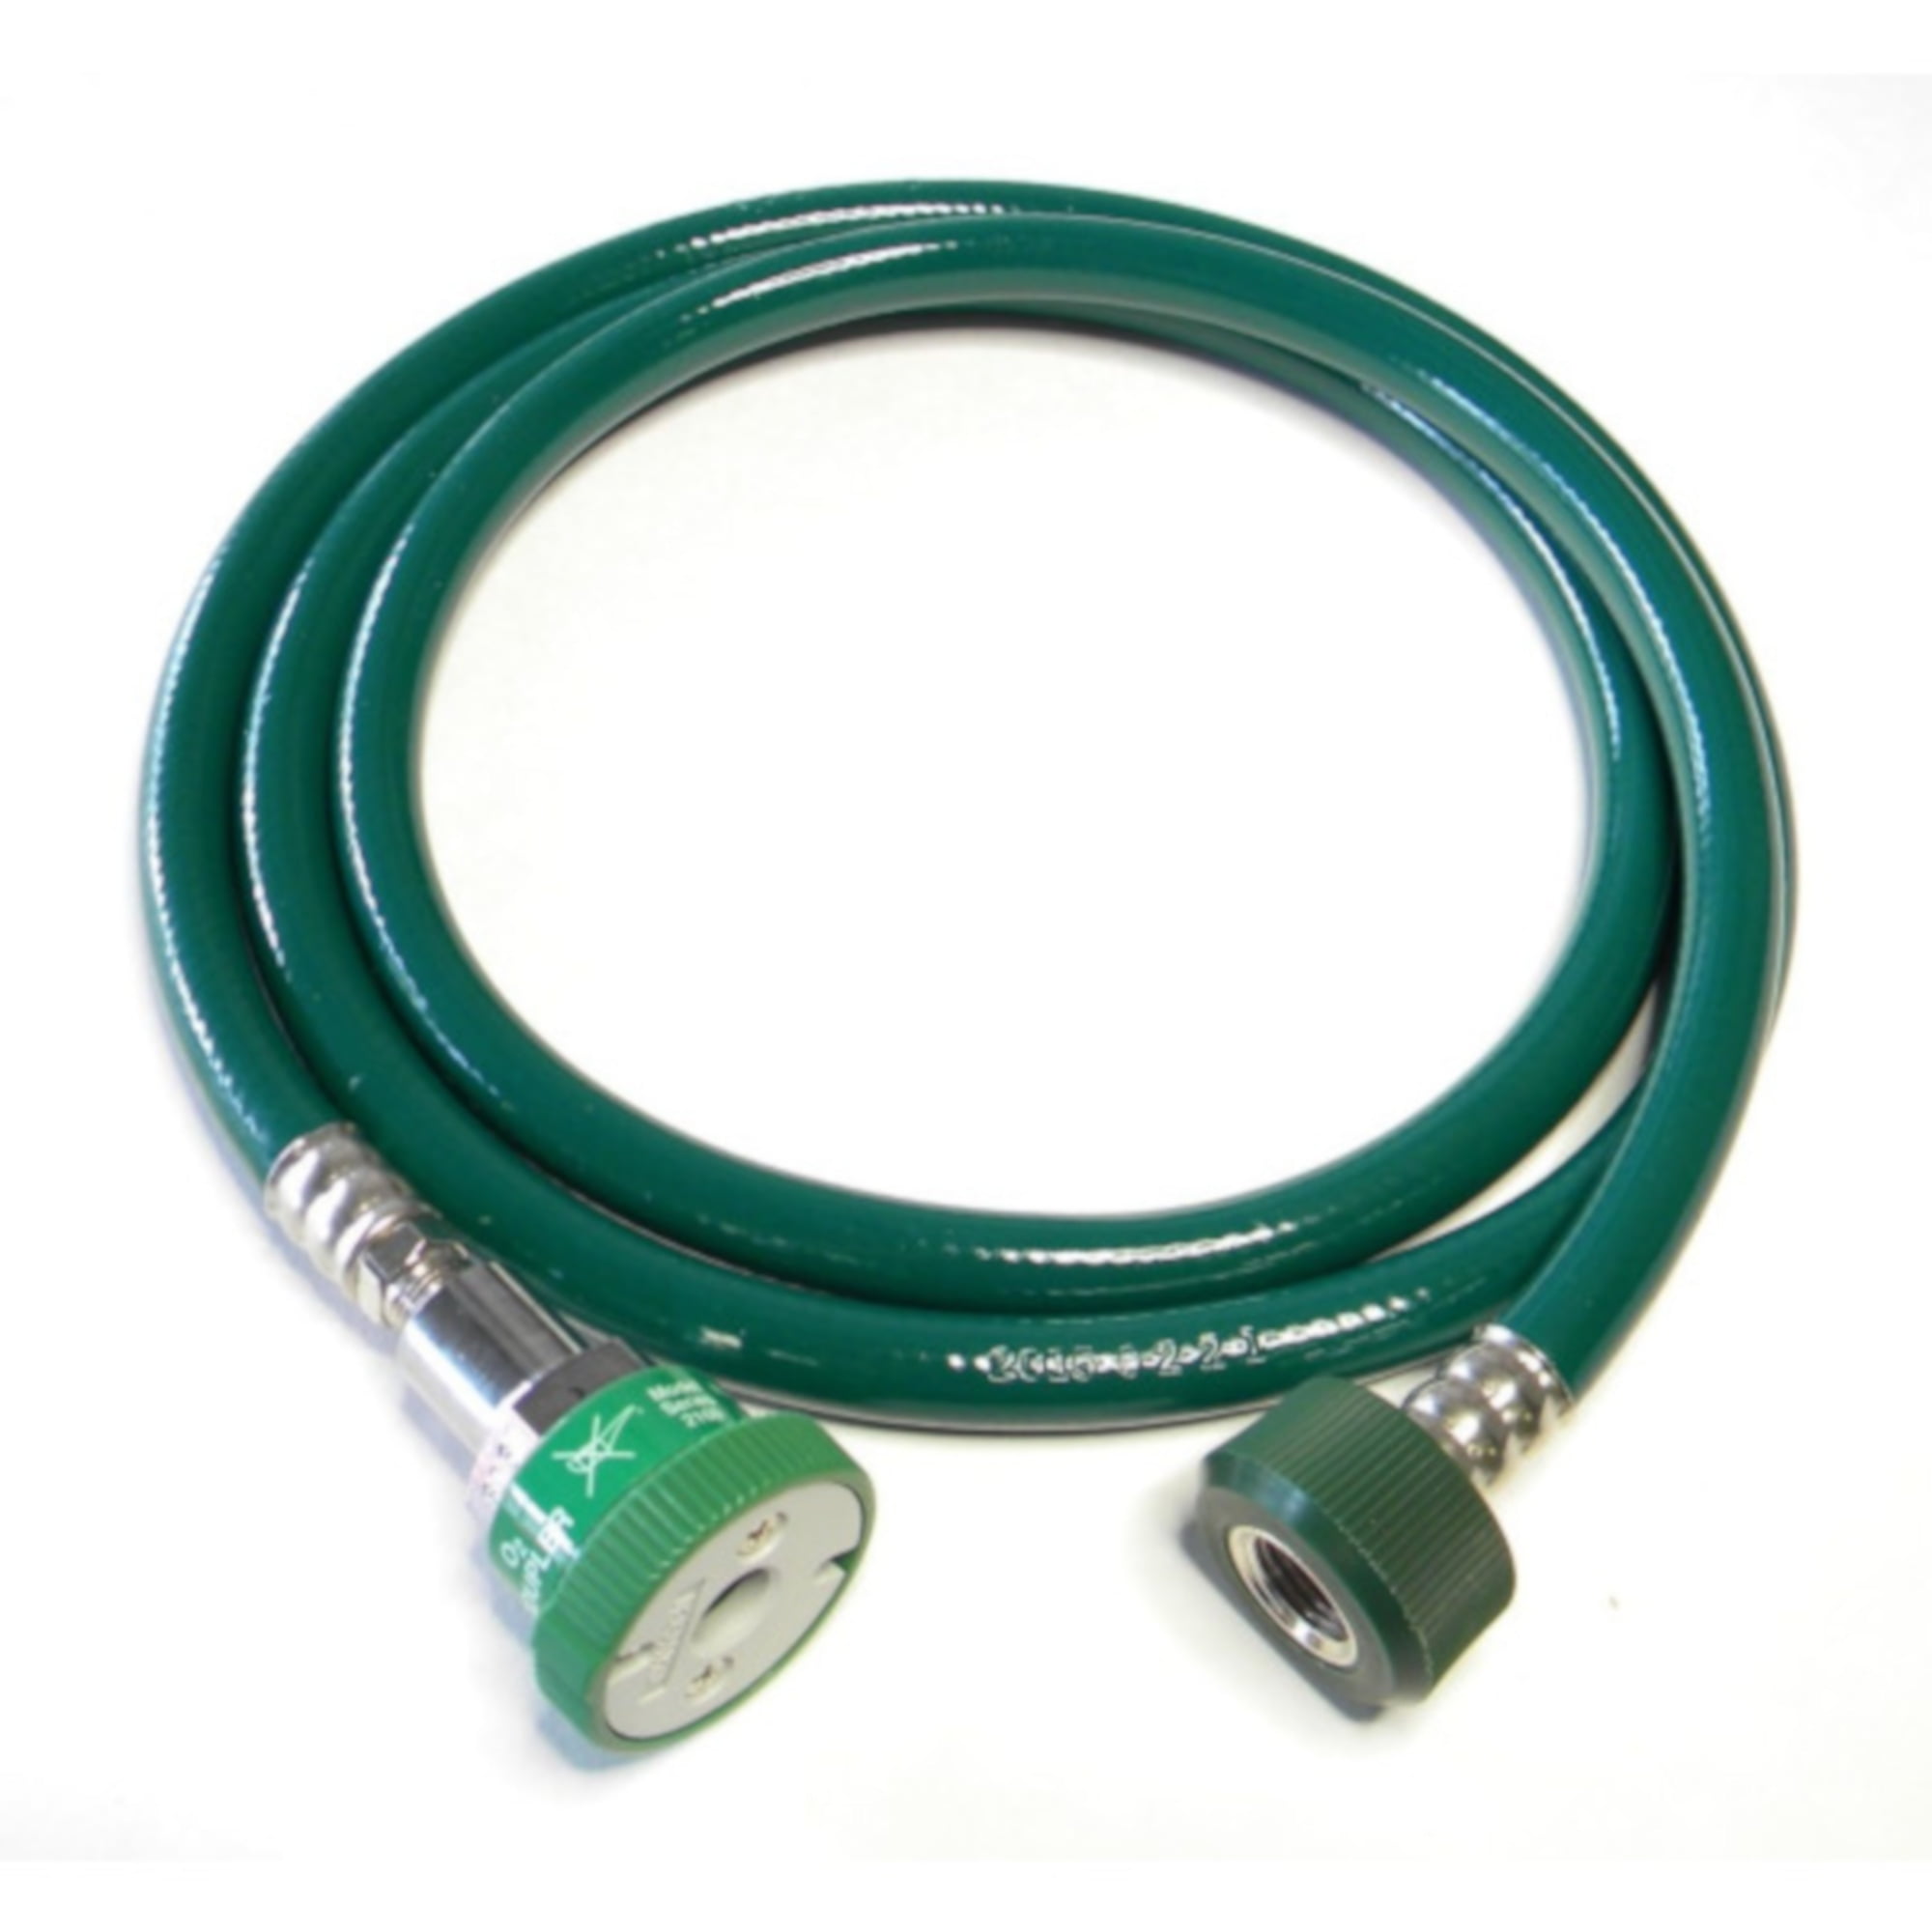 Medical O2 Hose 1240 DISS Hand Tight 1240 DISS Hand Tight 5 Ft 